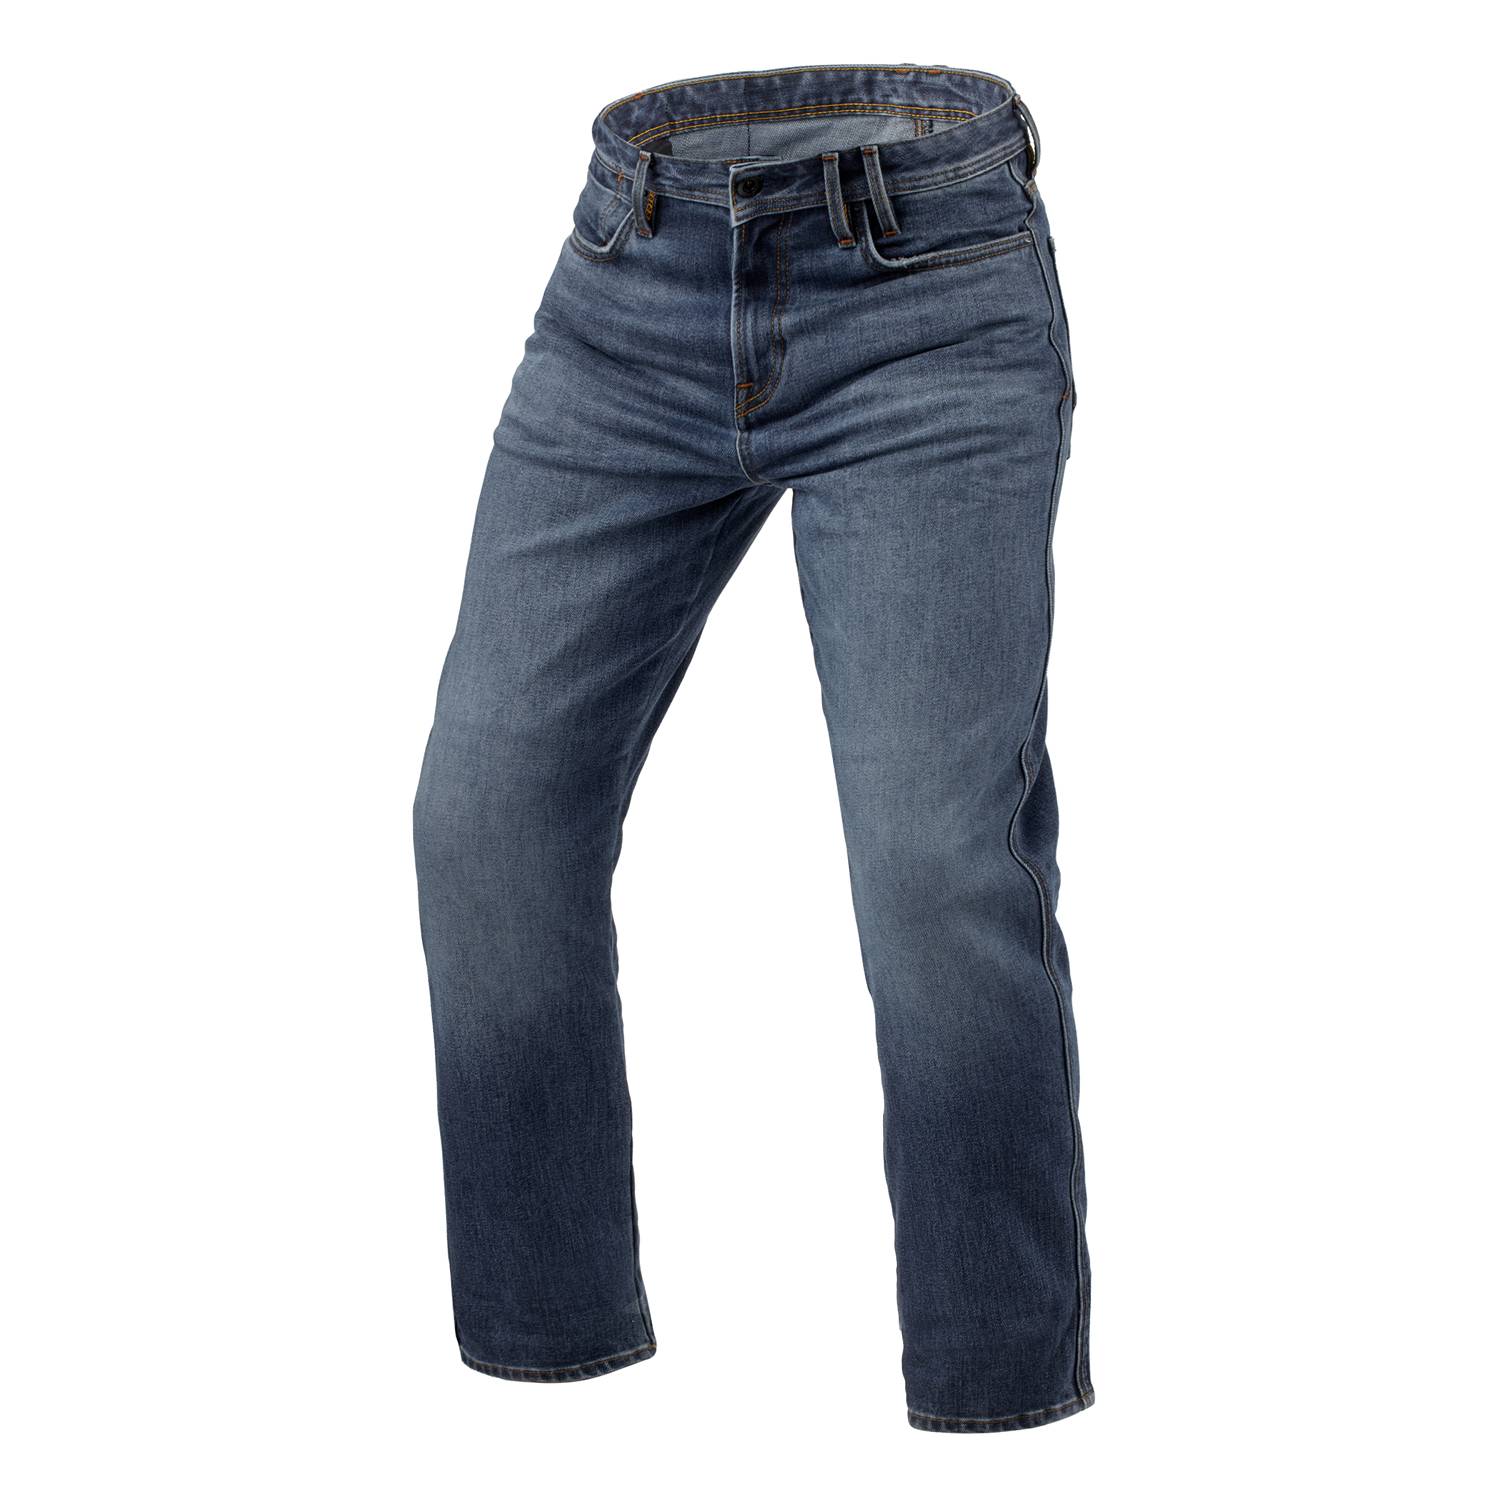 Image of EU REV'IT! Jeans Lombard 3 RF Medium Blue Stone L34 Motorcycle Jeans Taille L34/W28